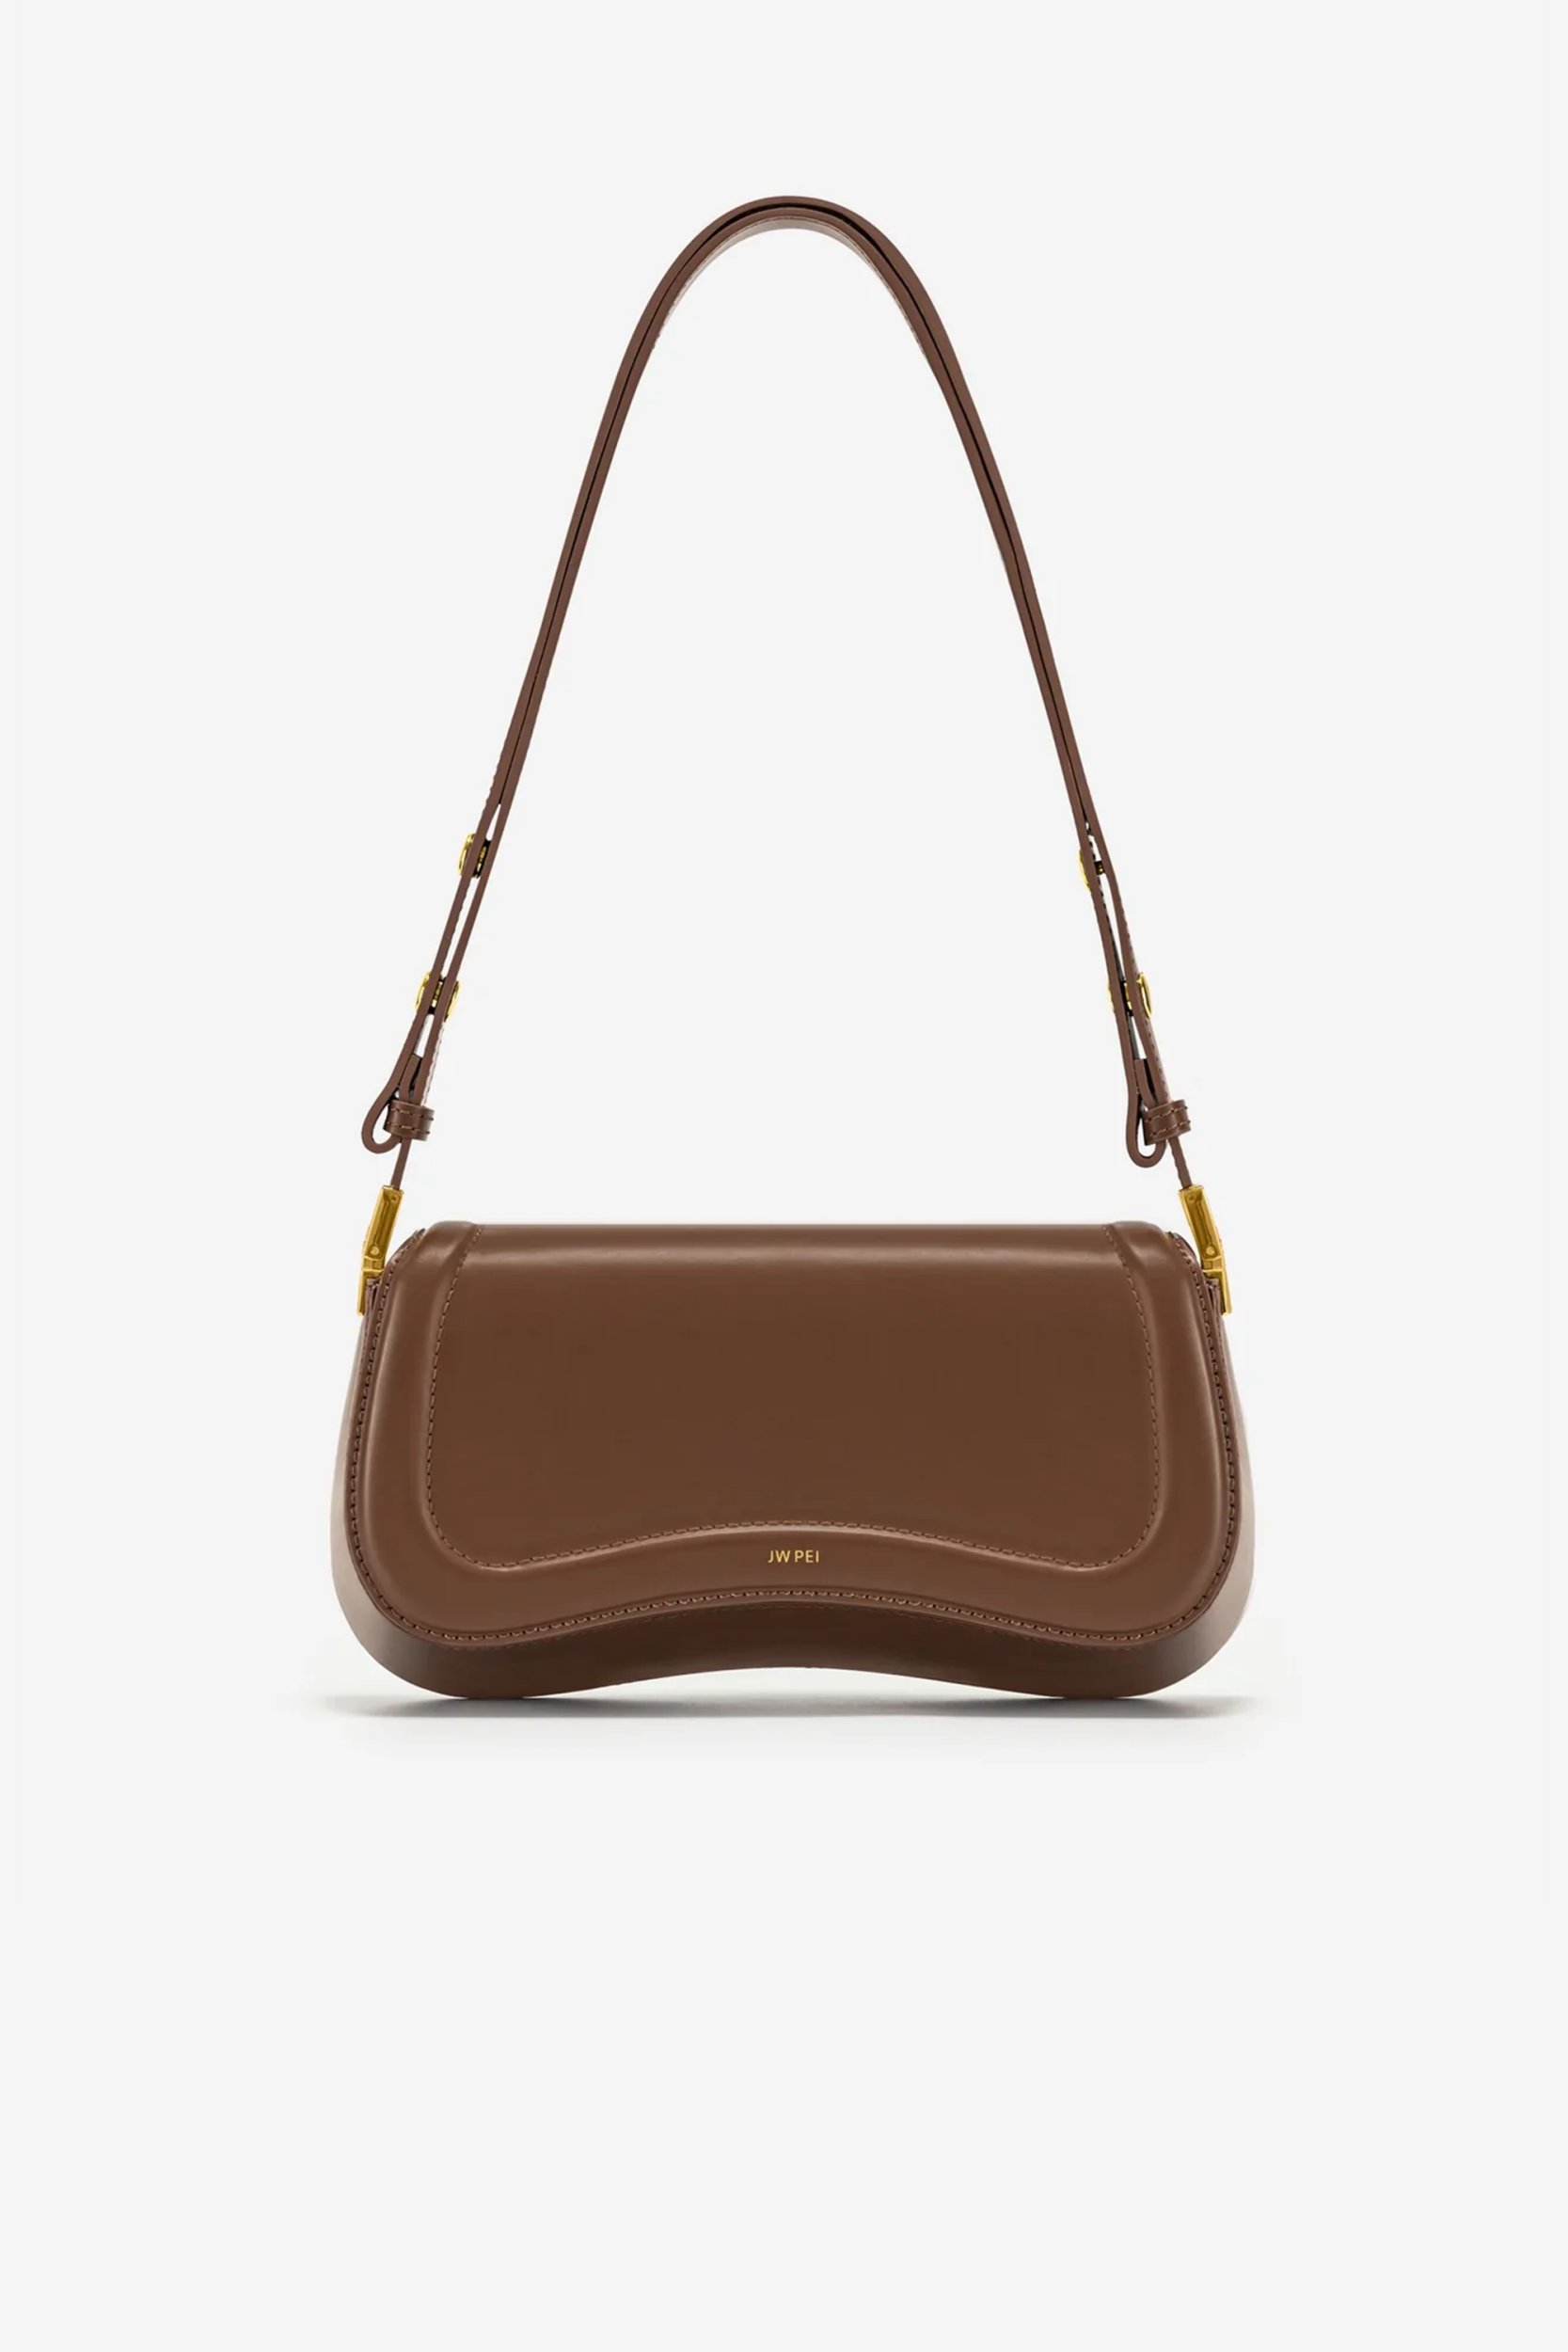 10 Stylish Designer Baguette Bags Worth Investing In